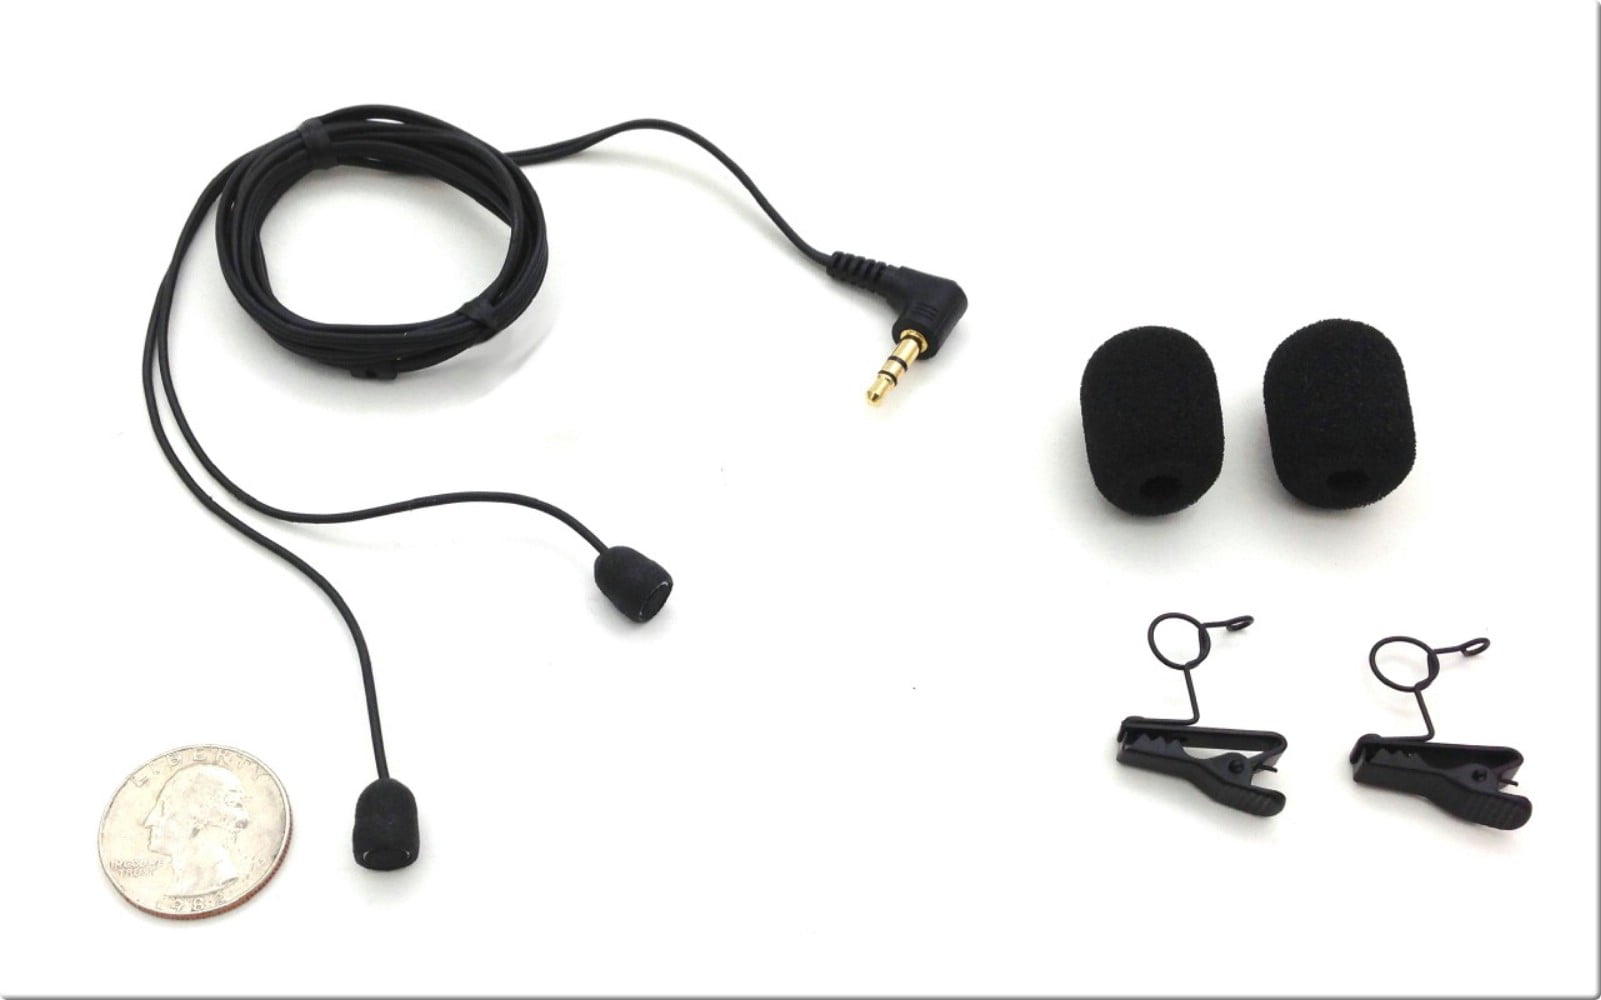 Sound Professionals Binaural High Sensitivity Miniature Microphones with black cables and right-angle plug . SP-BMC-2-RA removable clips and windscreens included 